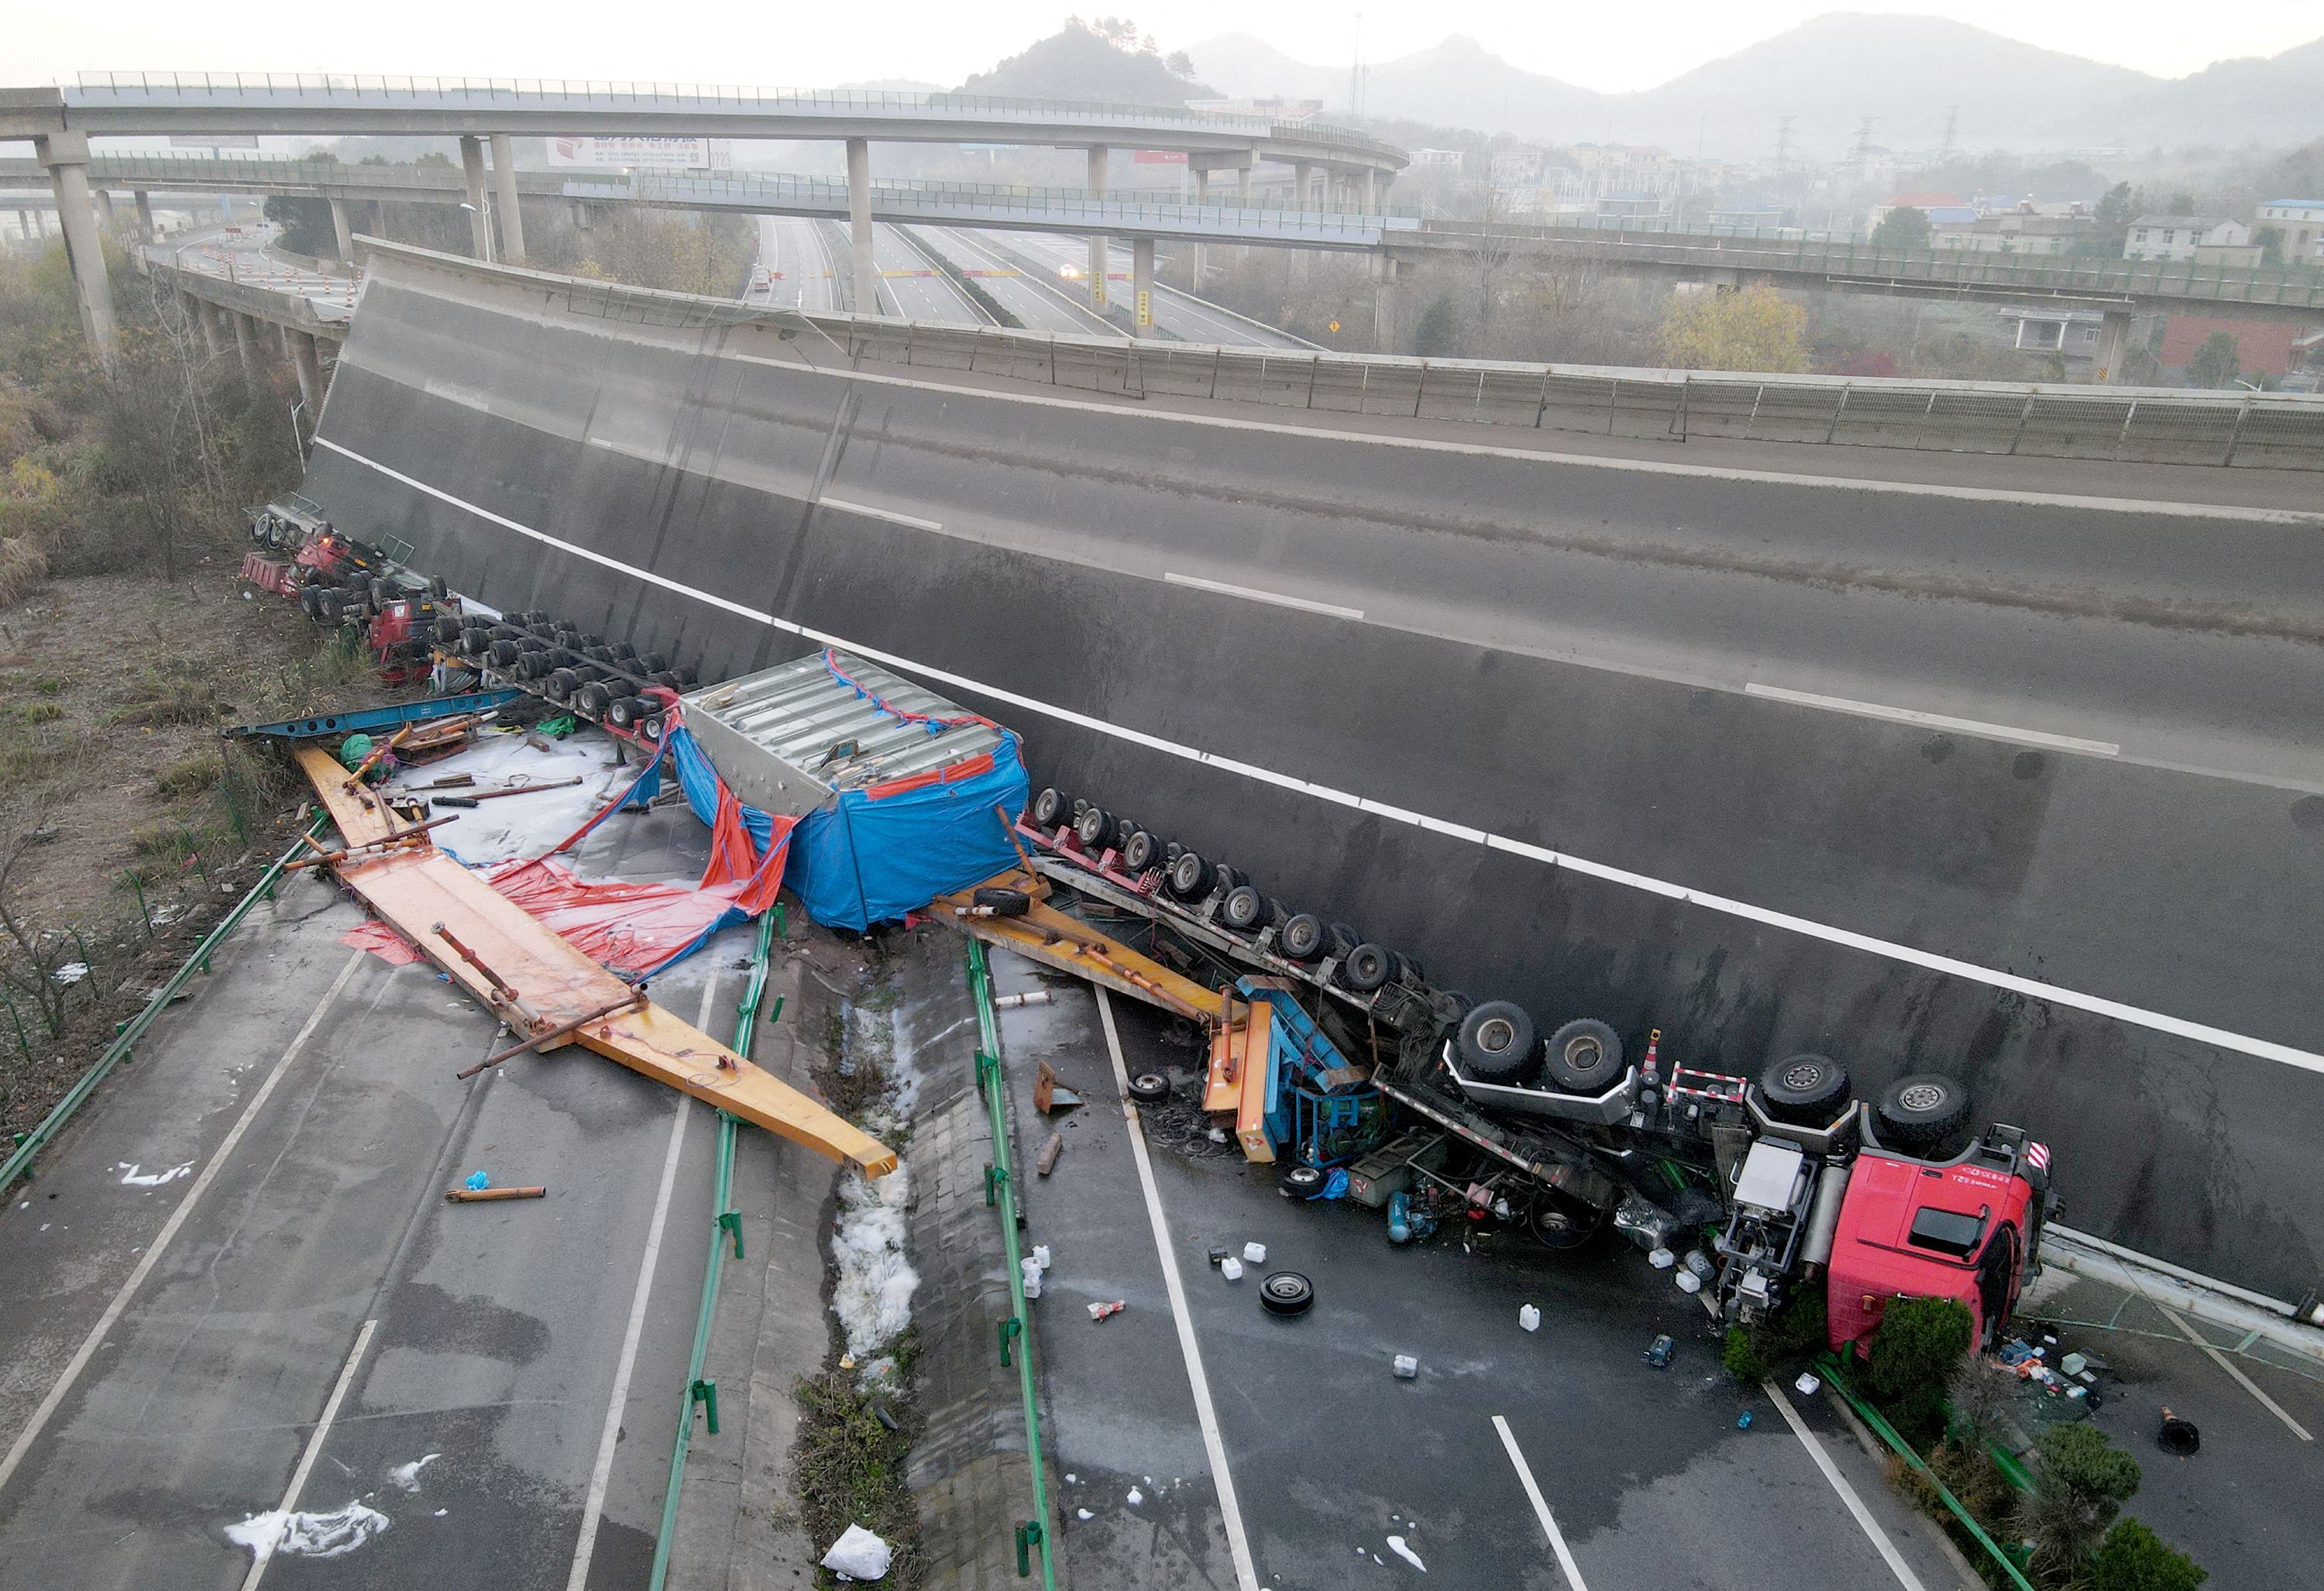 Overturned vehicles are seen at the site where a highway flyover collapsed in Ezhou